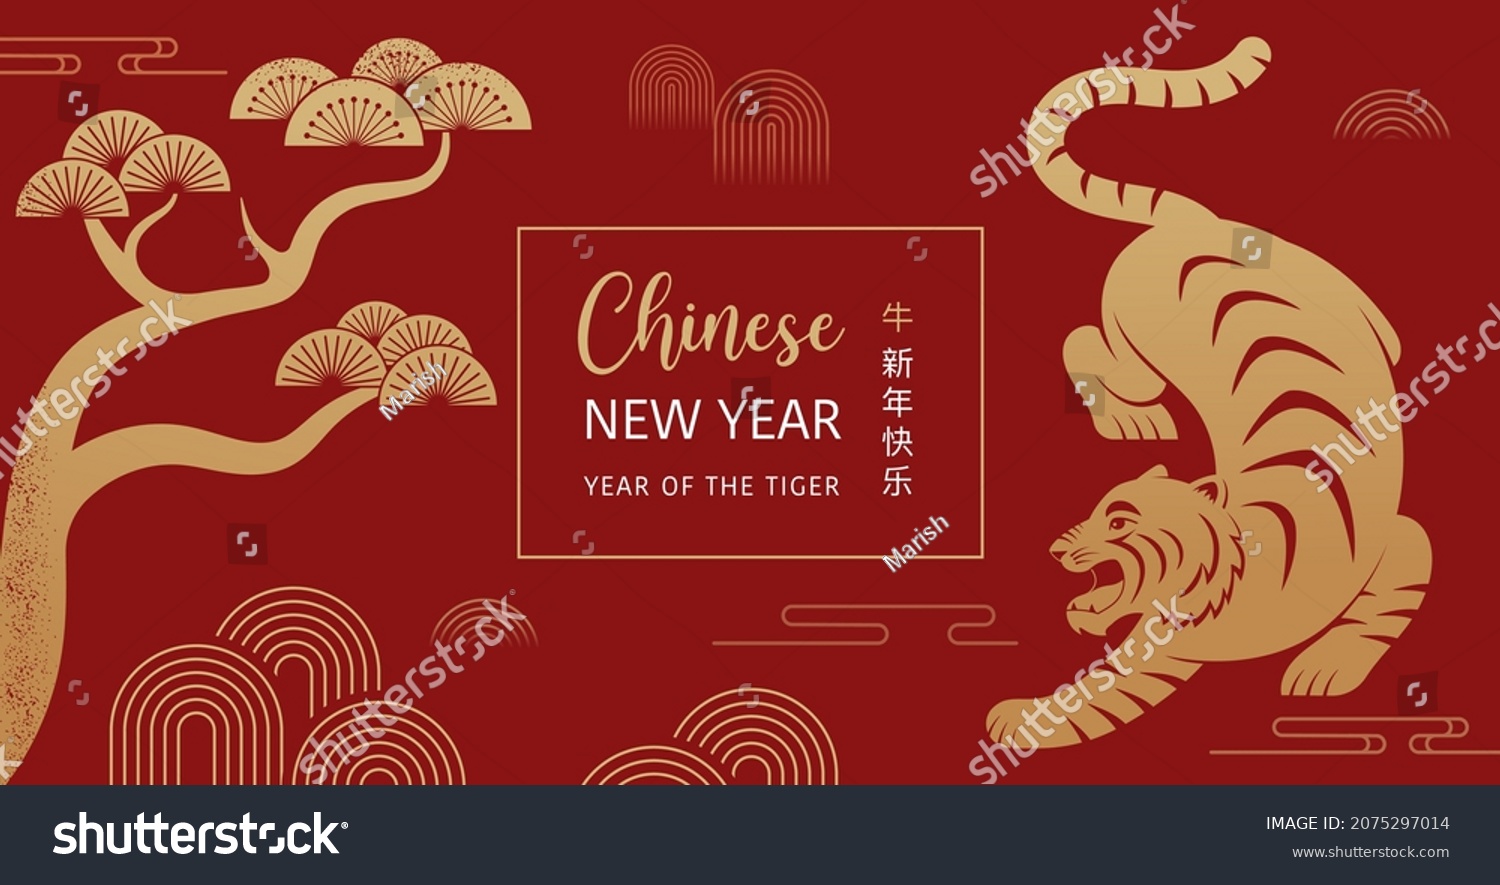 Chinese new year 2022 year of the tiger - Chinese zodiac symbol, Lunar new year concept, modern background design #2075297014